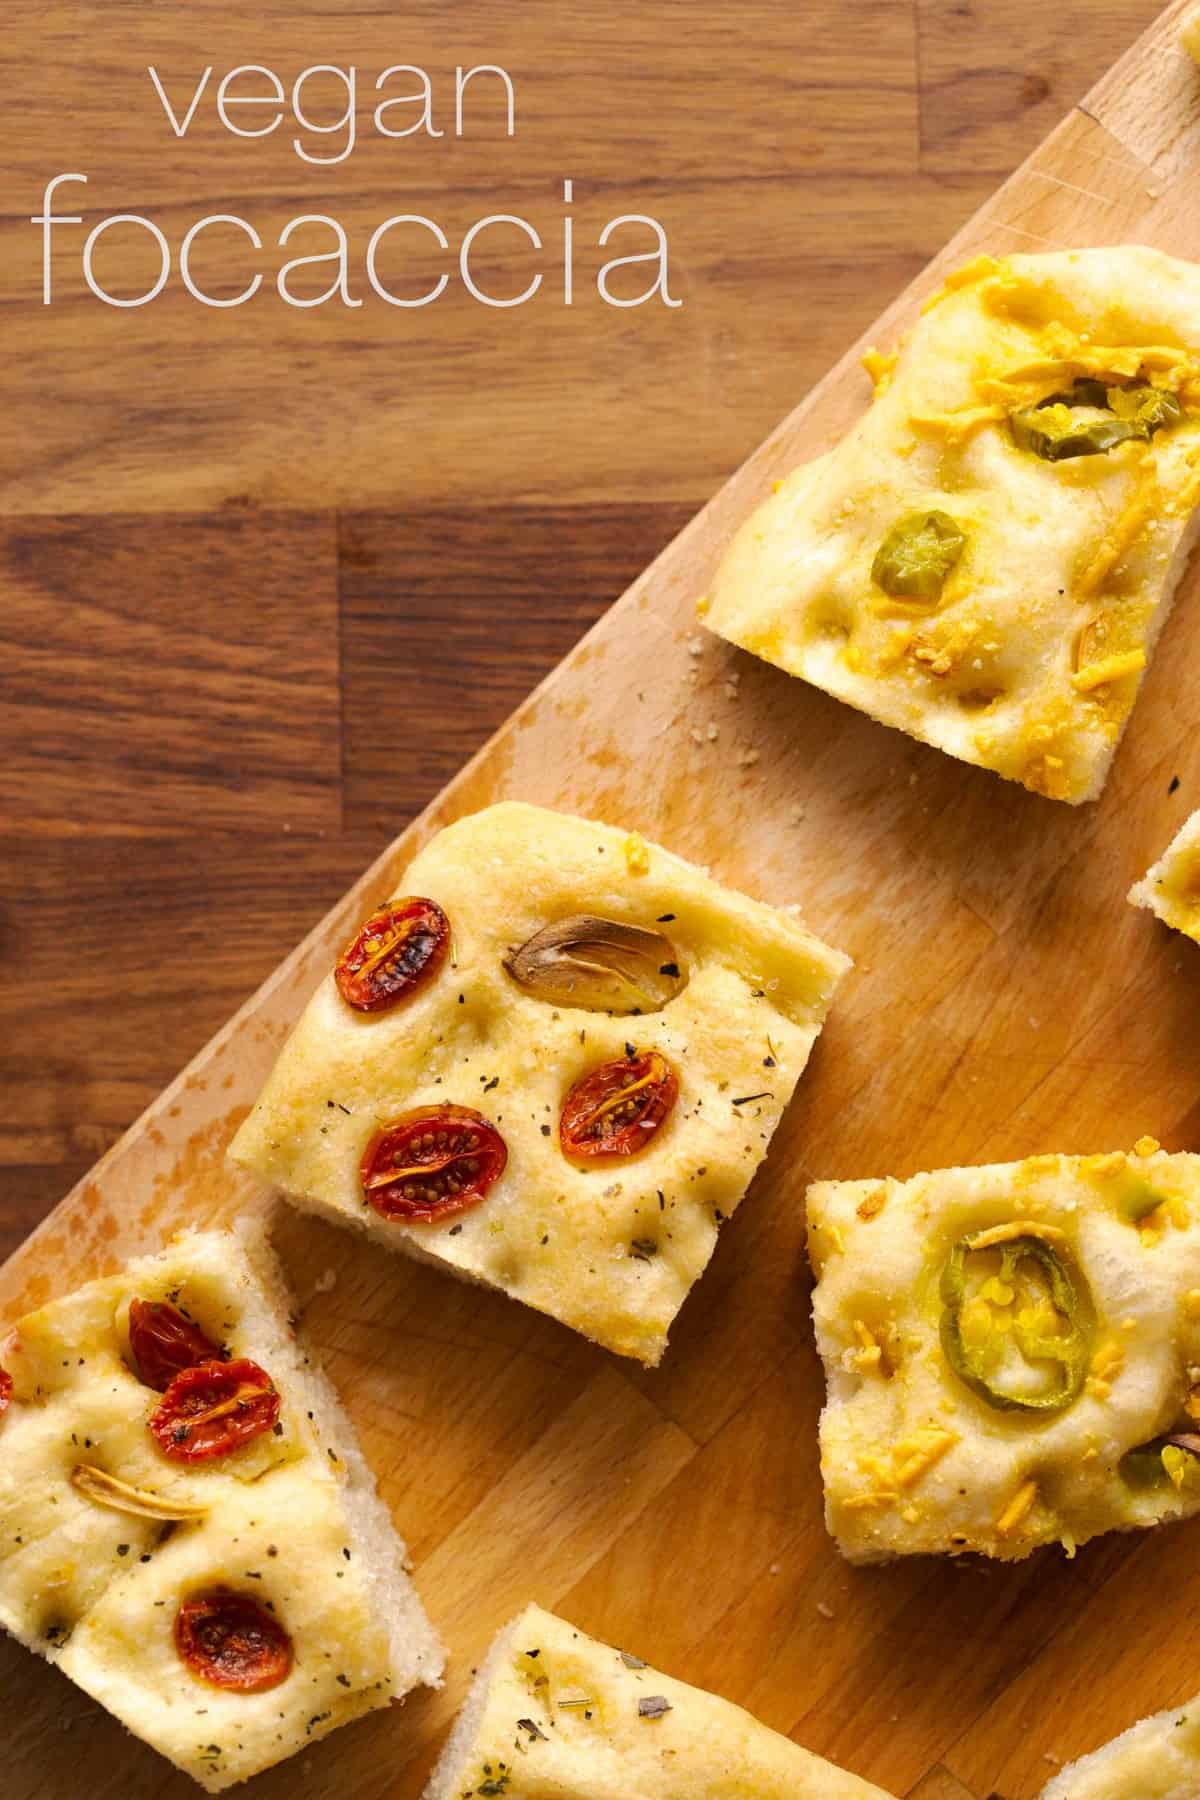 Jalapeno cheese and tomato herb focaccia dough side-by-side and ready for baking.